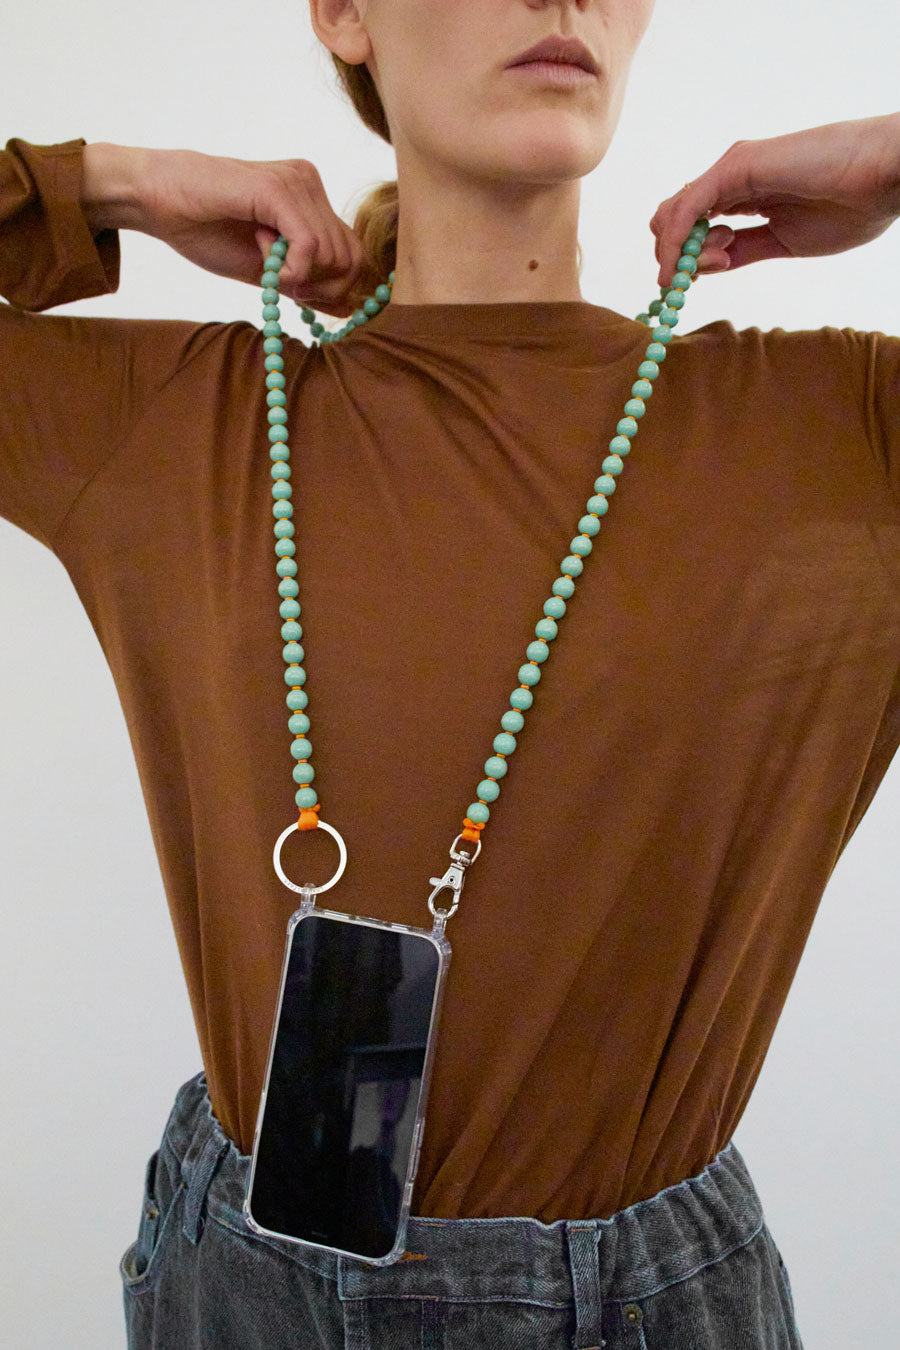 Ina Seifart Handykette Iphone Necklace in Pastel Green with Orange Thread